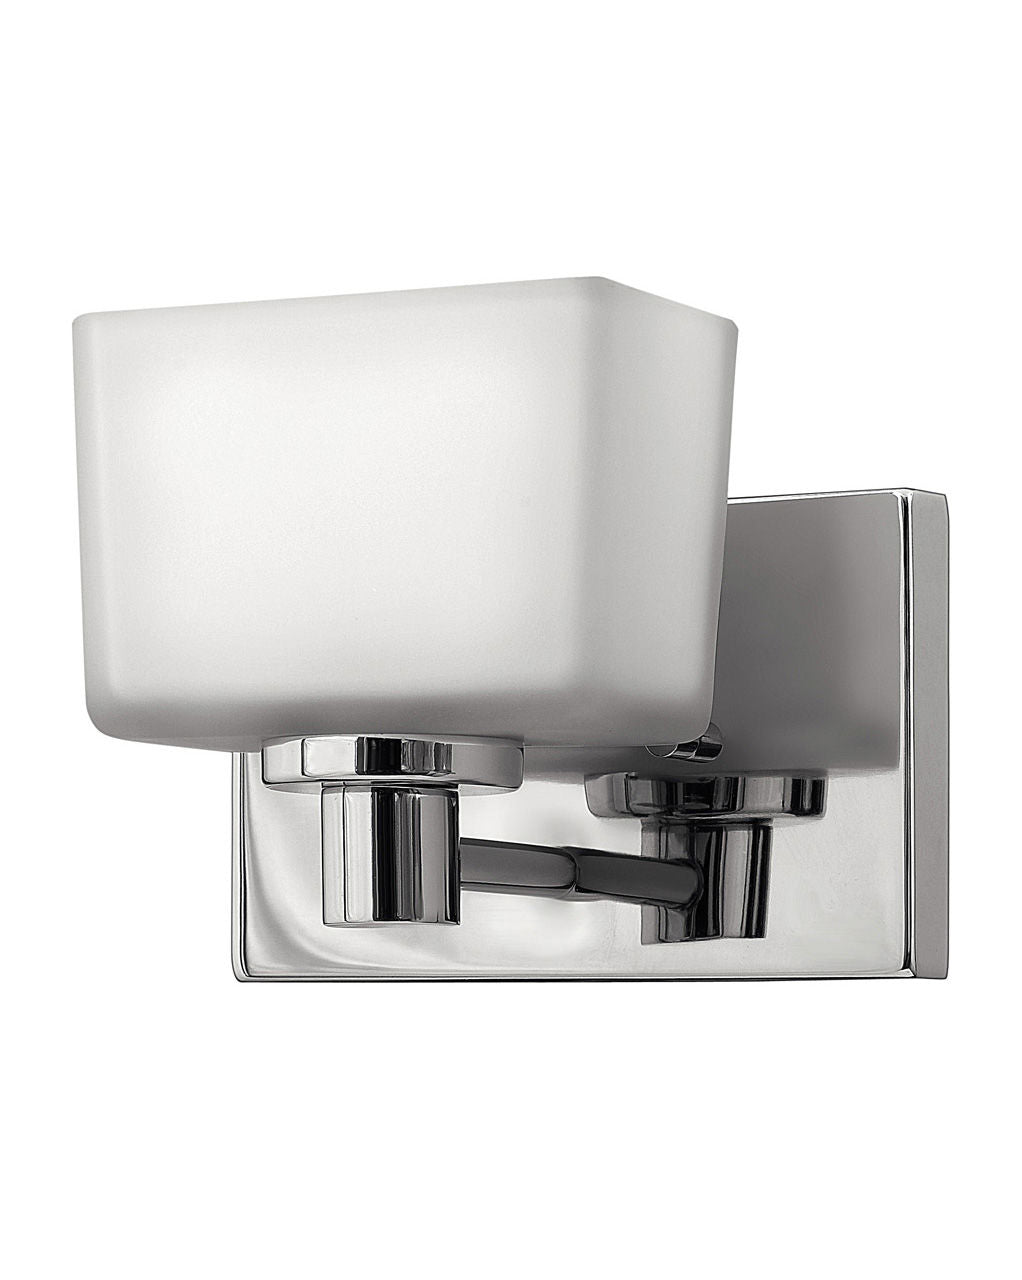 Hinkley Taylor Vanity Wall Sconce Collection